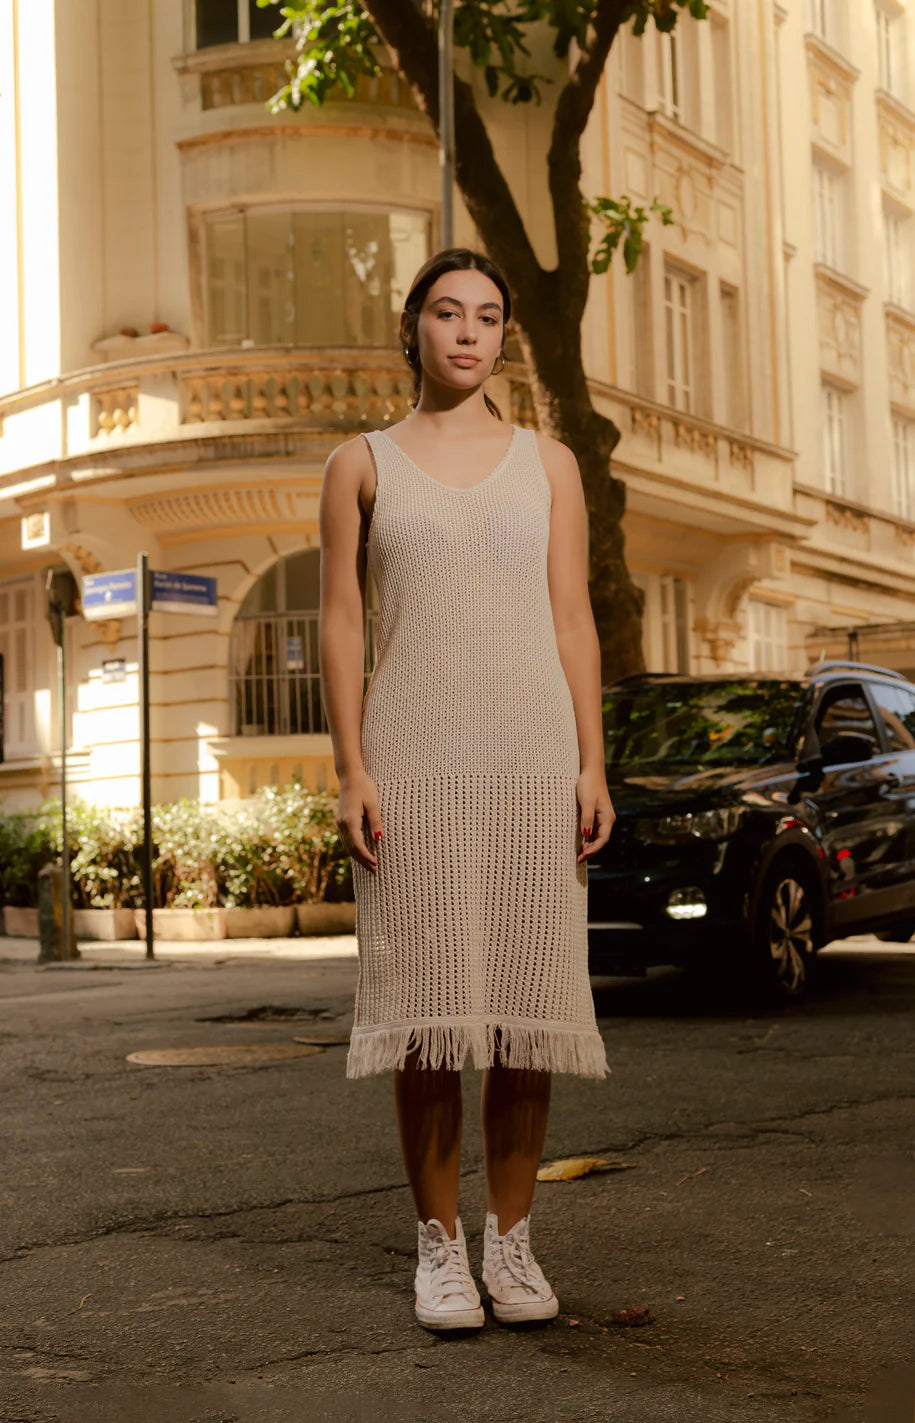 Recycled Open Knit Dress